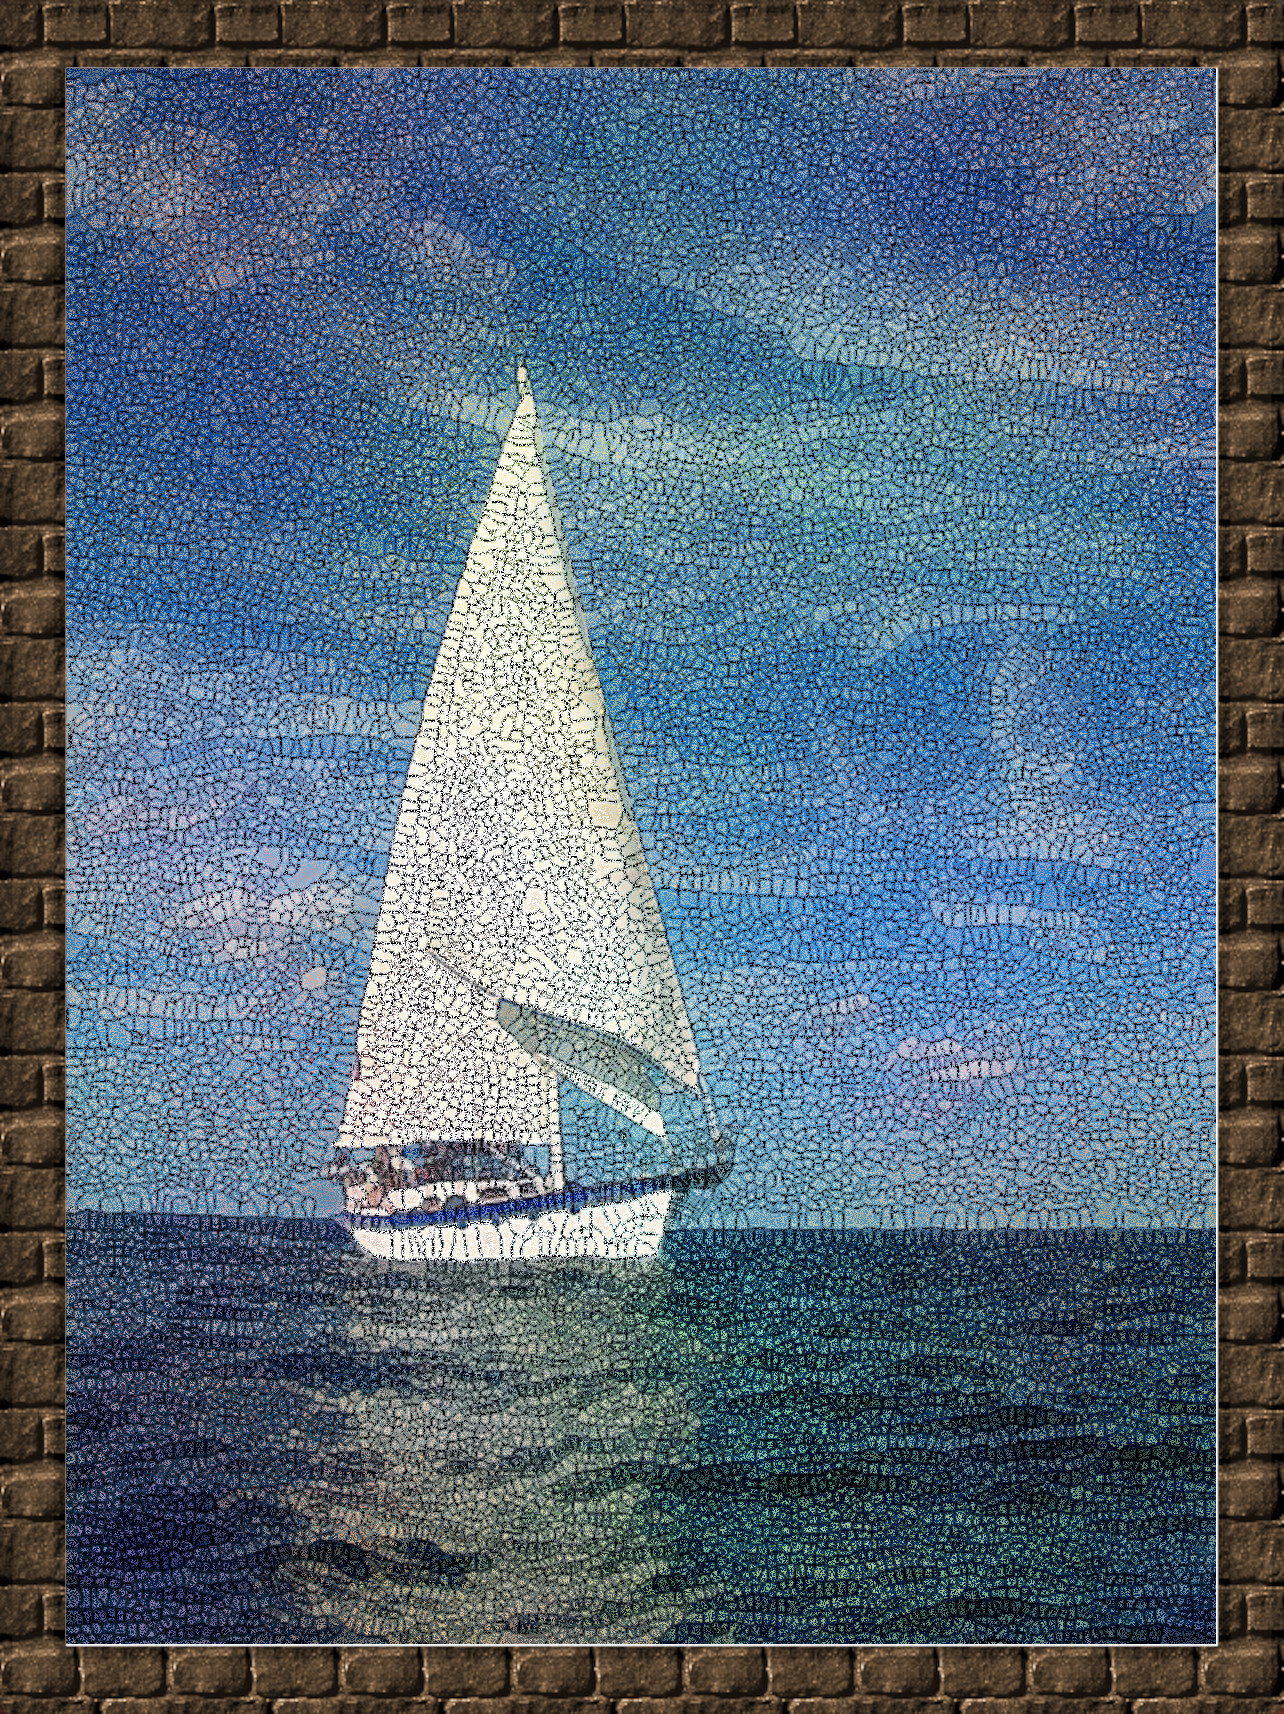 blue-water-sailing-1-1437302_DN_Simple_Graphics_Mosaic_Texture_Coloree.jpg